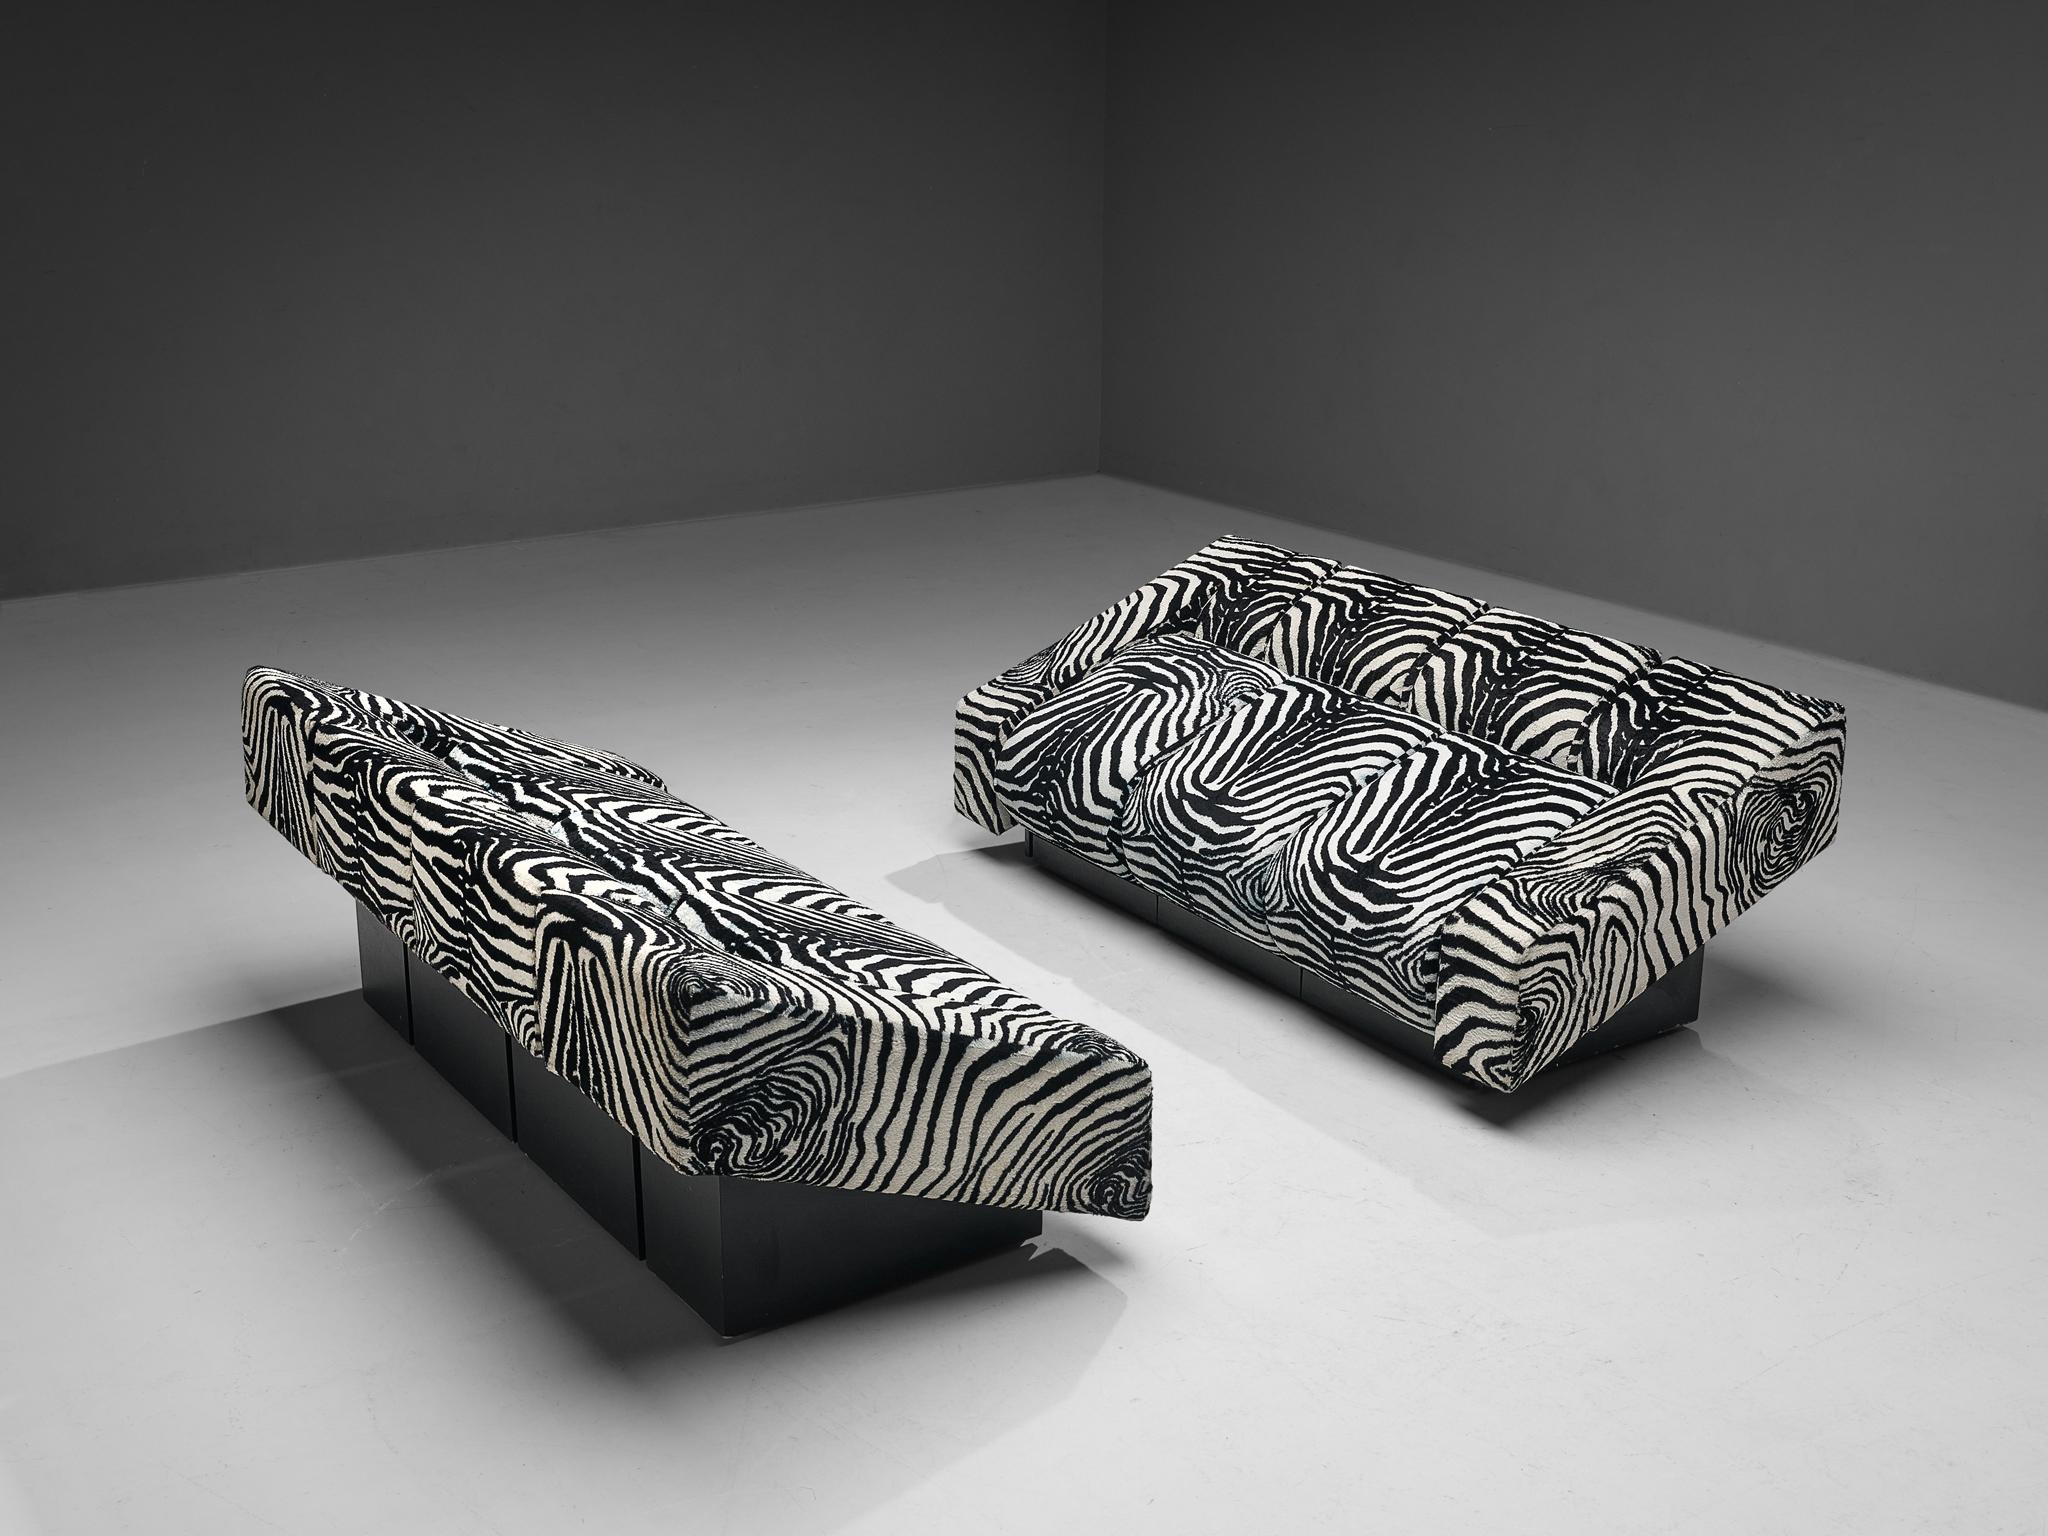 Mario Botta for Alias, pair of sofas, model ´Obliqua´, fabric, black lacquered wood, Italy, circa 1983. 

Bold pair of 'Obliqua' sofas designed by Mario Botta for Alias. Upholstered in eccentric zebra print fabric, this set will definitely stand out